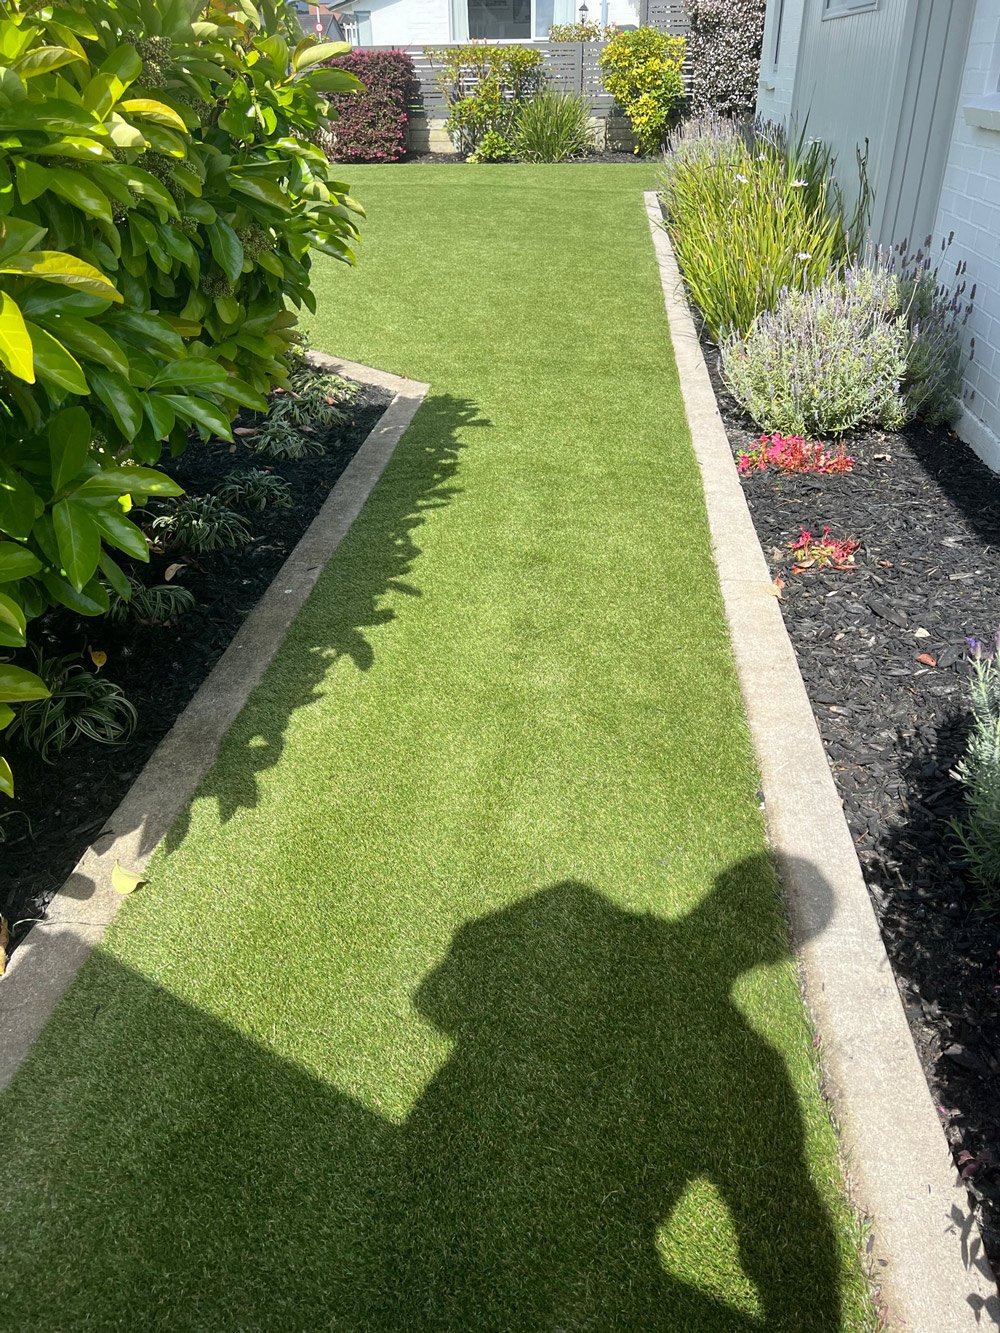 Perfectly trimmed lawn edges on a grass walkway outlined with concrete and gardens on either side